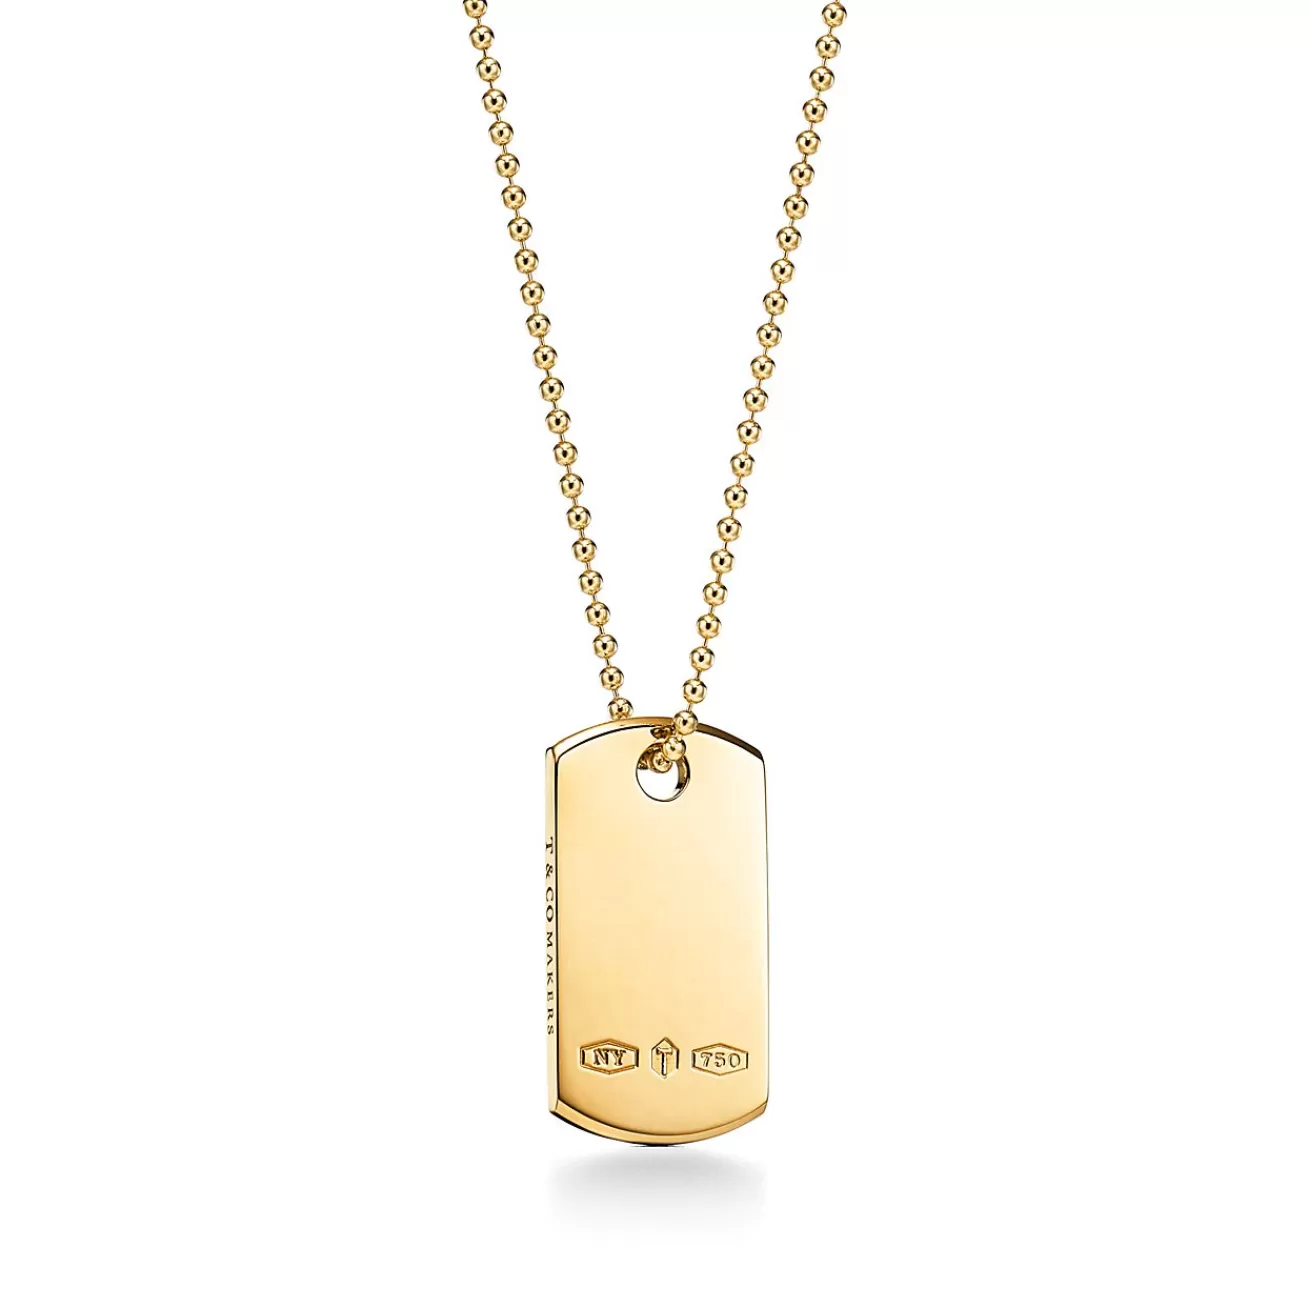 Tiffany & Co. Tiffany 1837® Makers I.D. tag pendant in 18k gold, 24". | ^ Necklaces & Pendants | Men's Jewelry